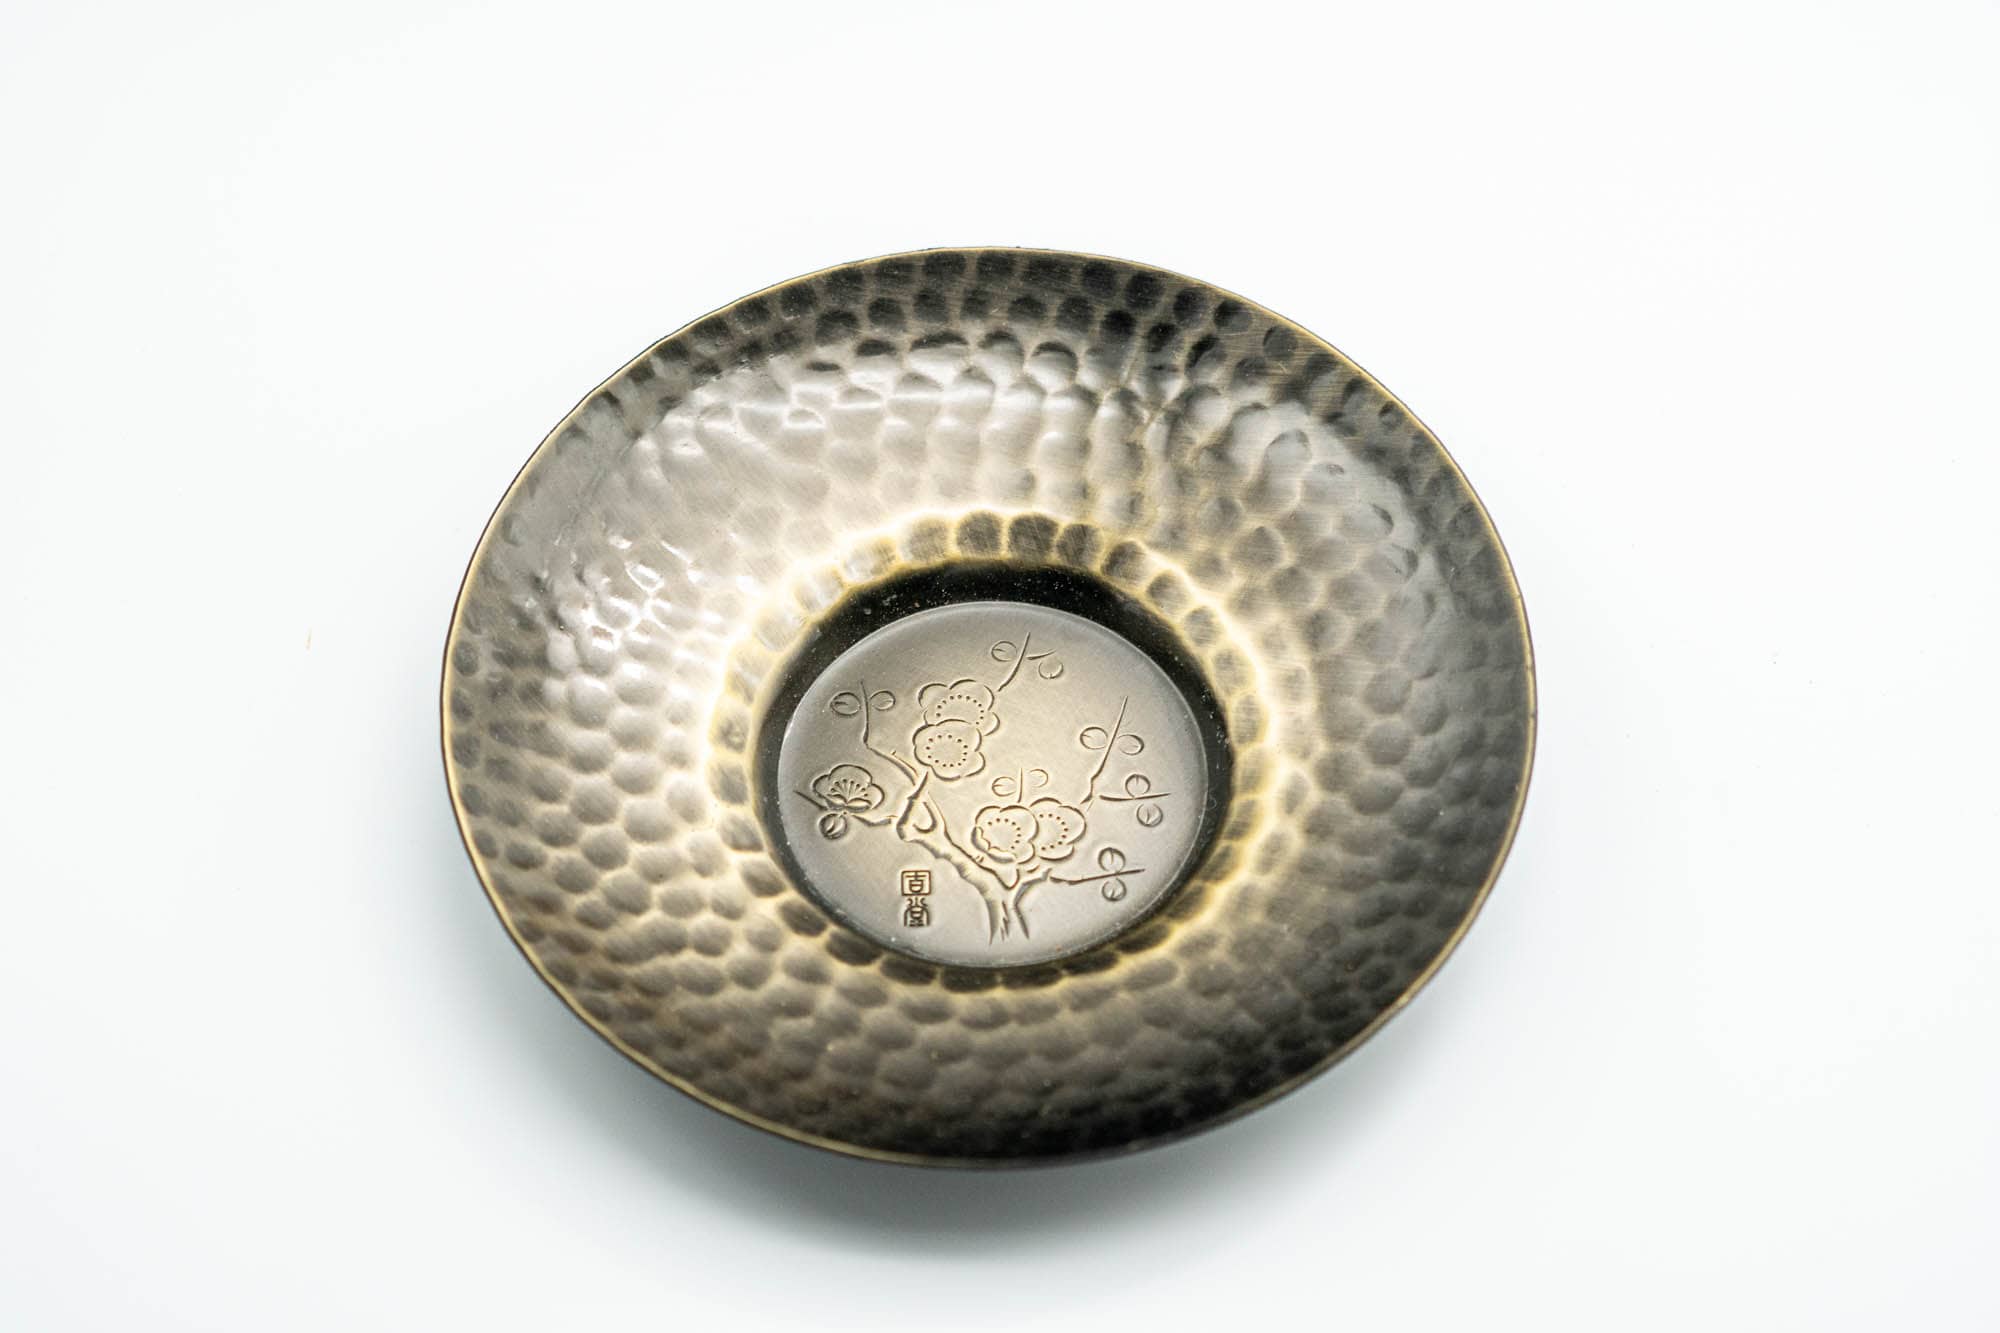 Japanese Chataku - Set of 5 Hammered Brass Uniquely Engraved Tea Saucers with Chasaji Tea Scoop in Wooden Box